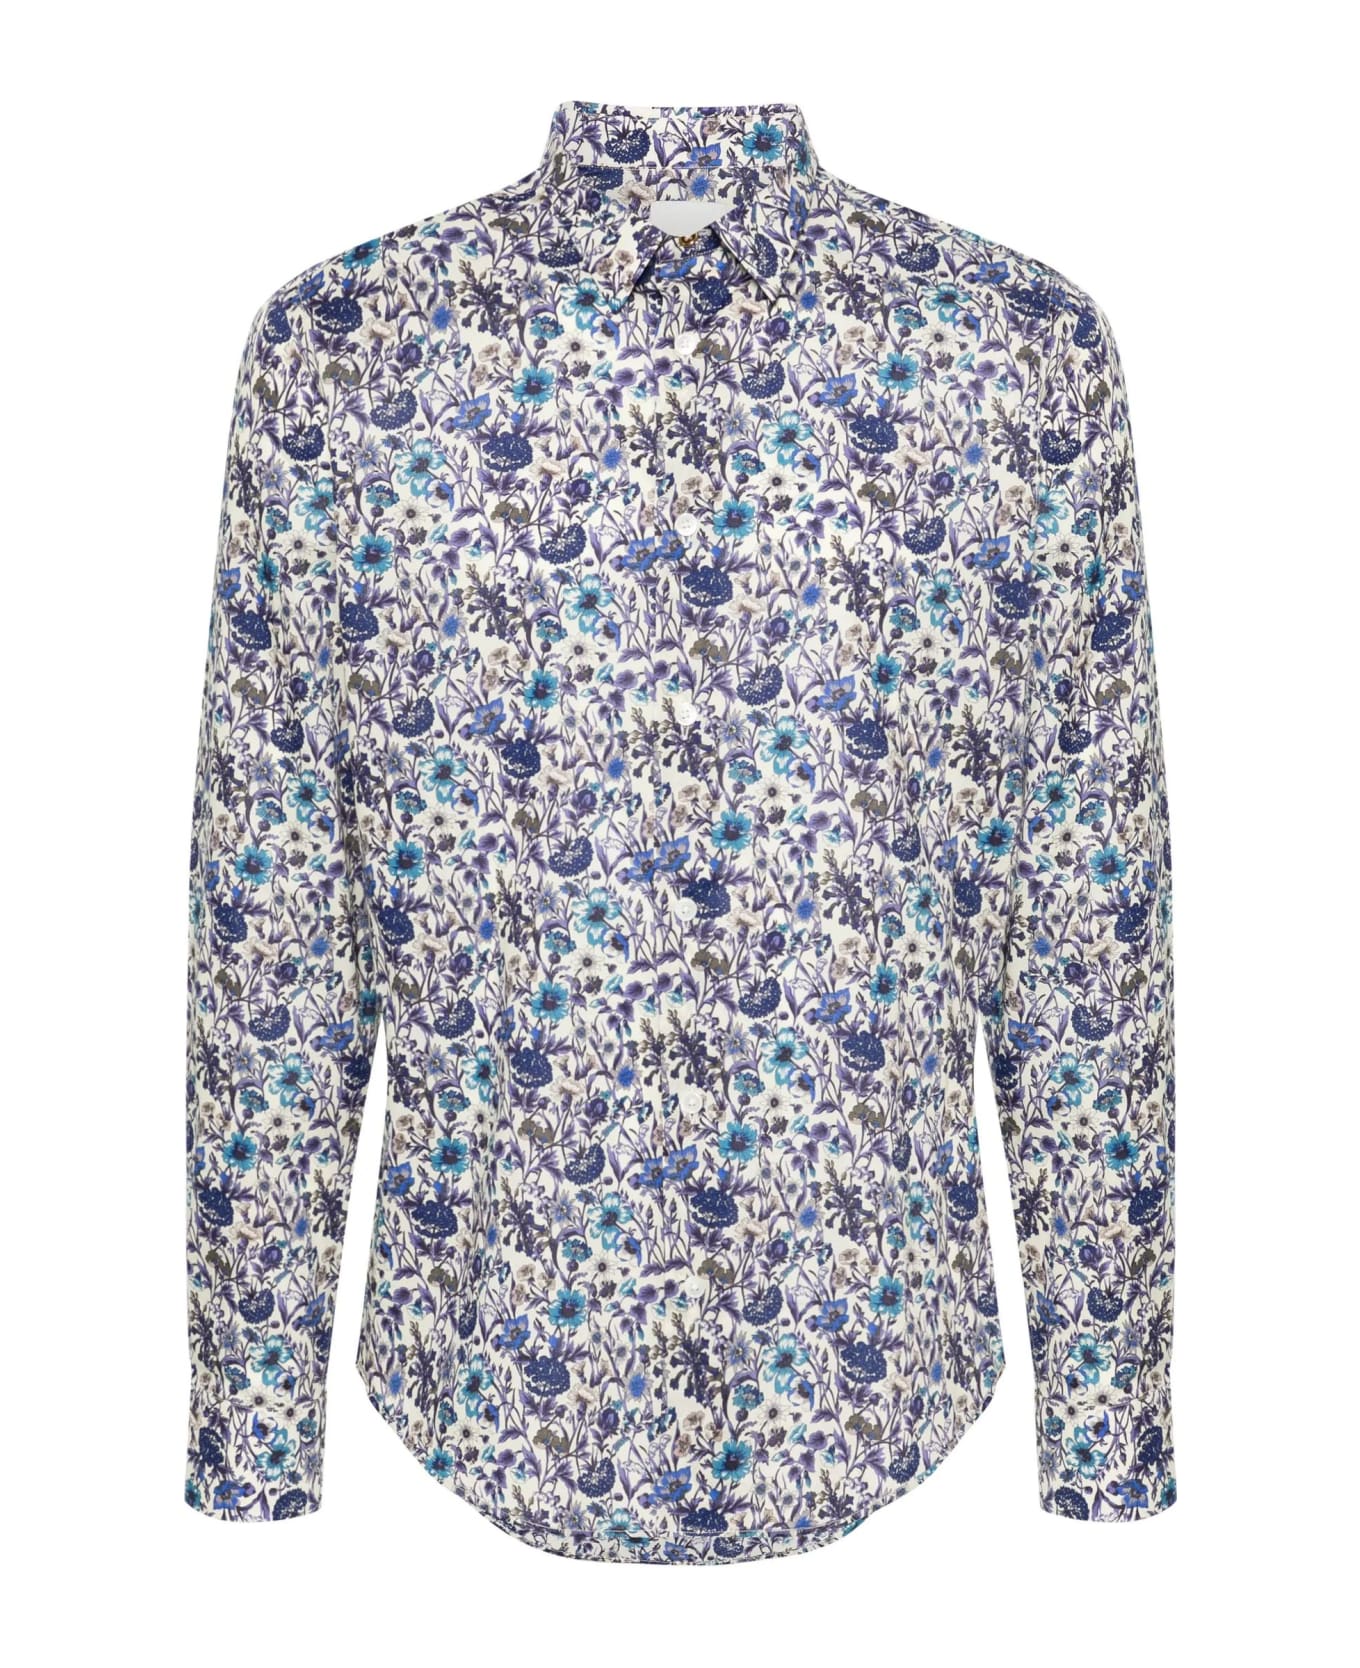 Paul Smith Shirts White - Multicolor